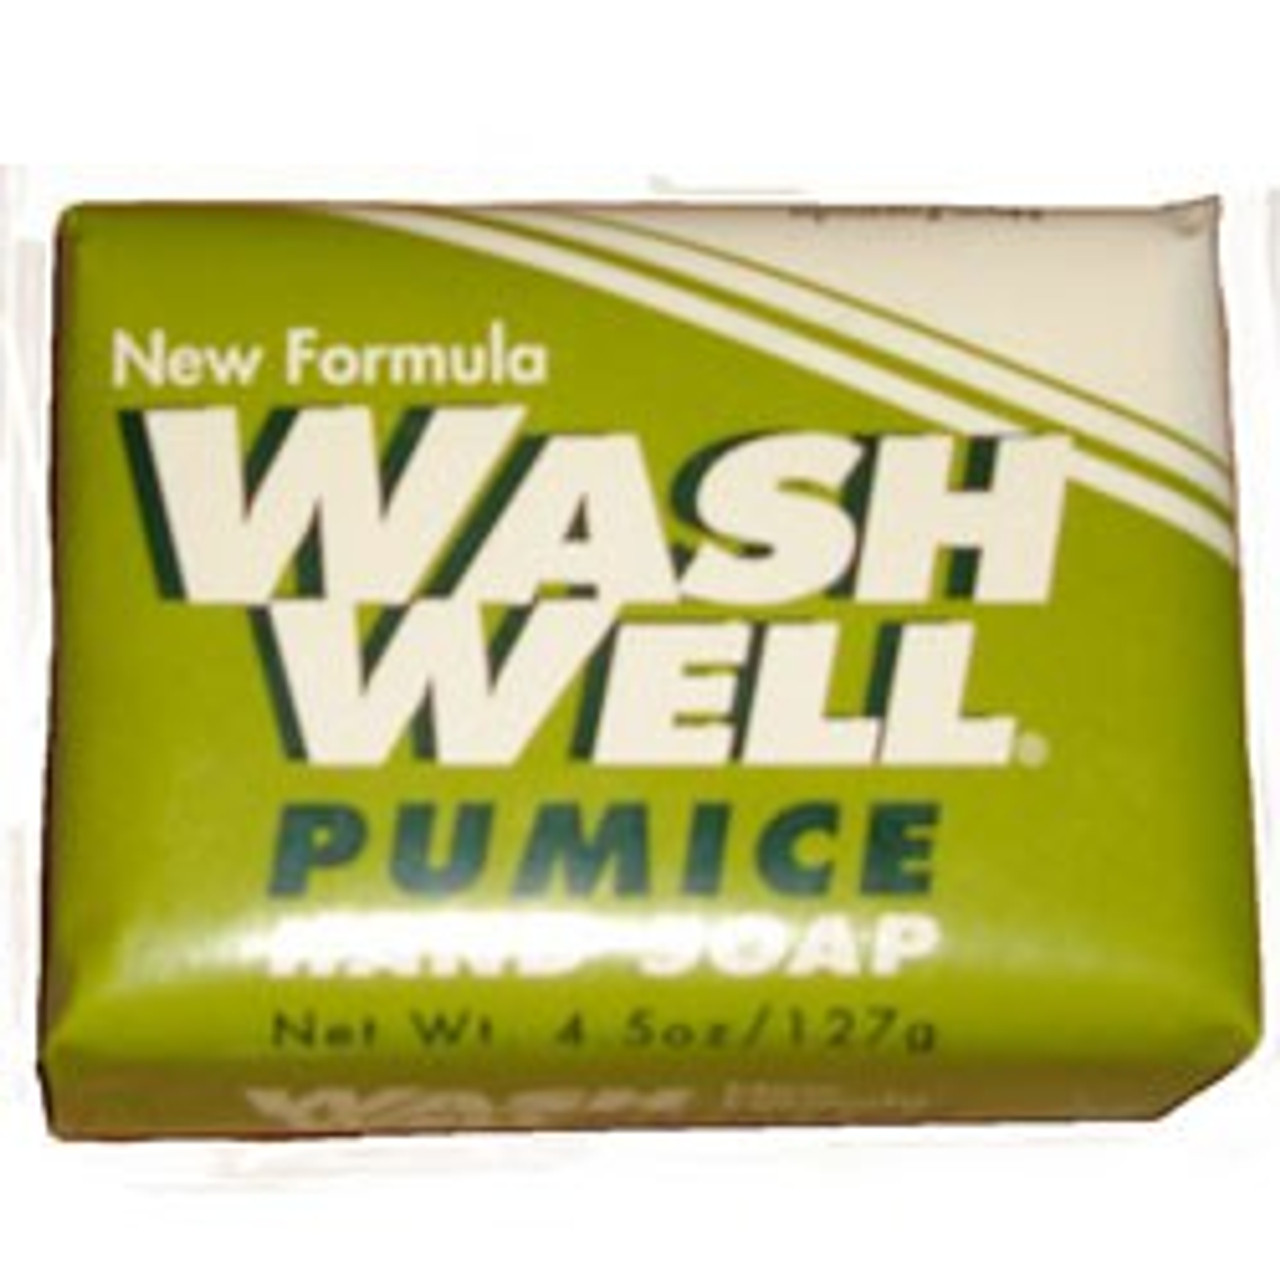 Wash Well Green Pumice Hand Soap 4.5 oz Bar - 12-Pack or 48-Pack